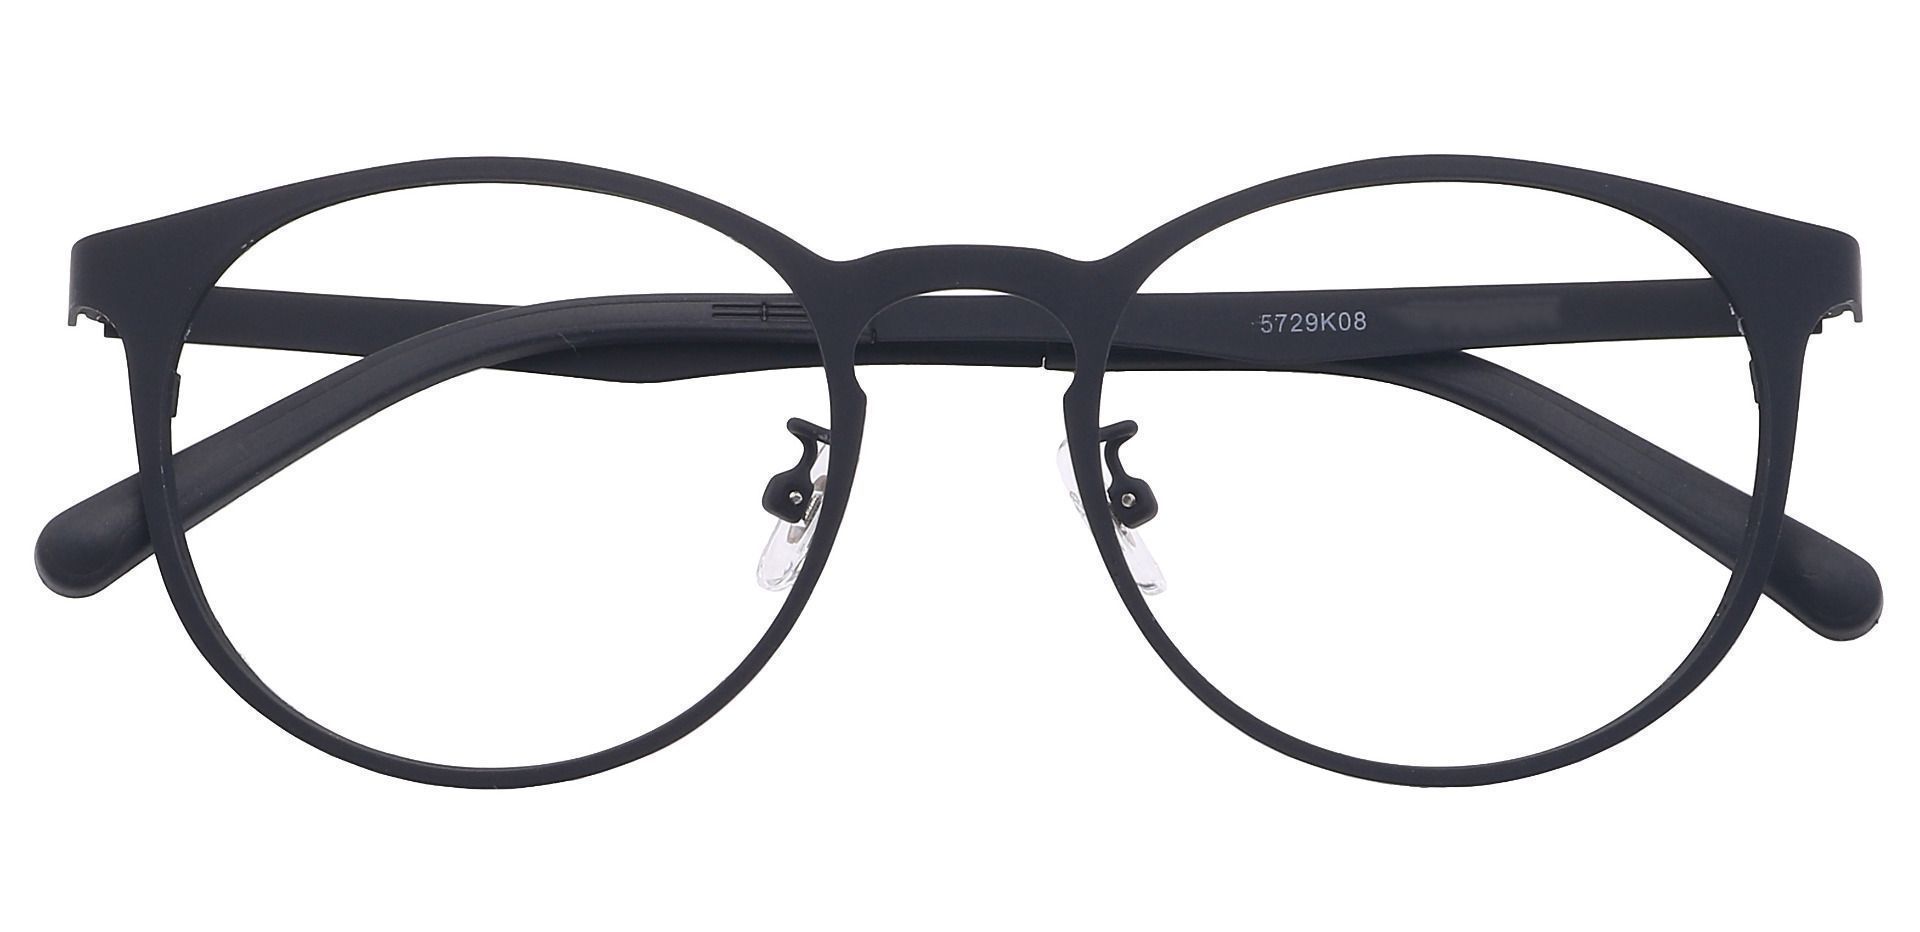 Wallace Oval Reading Glasses - Black